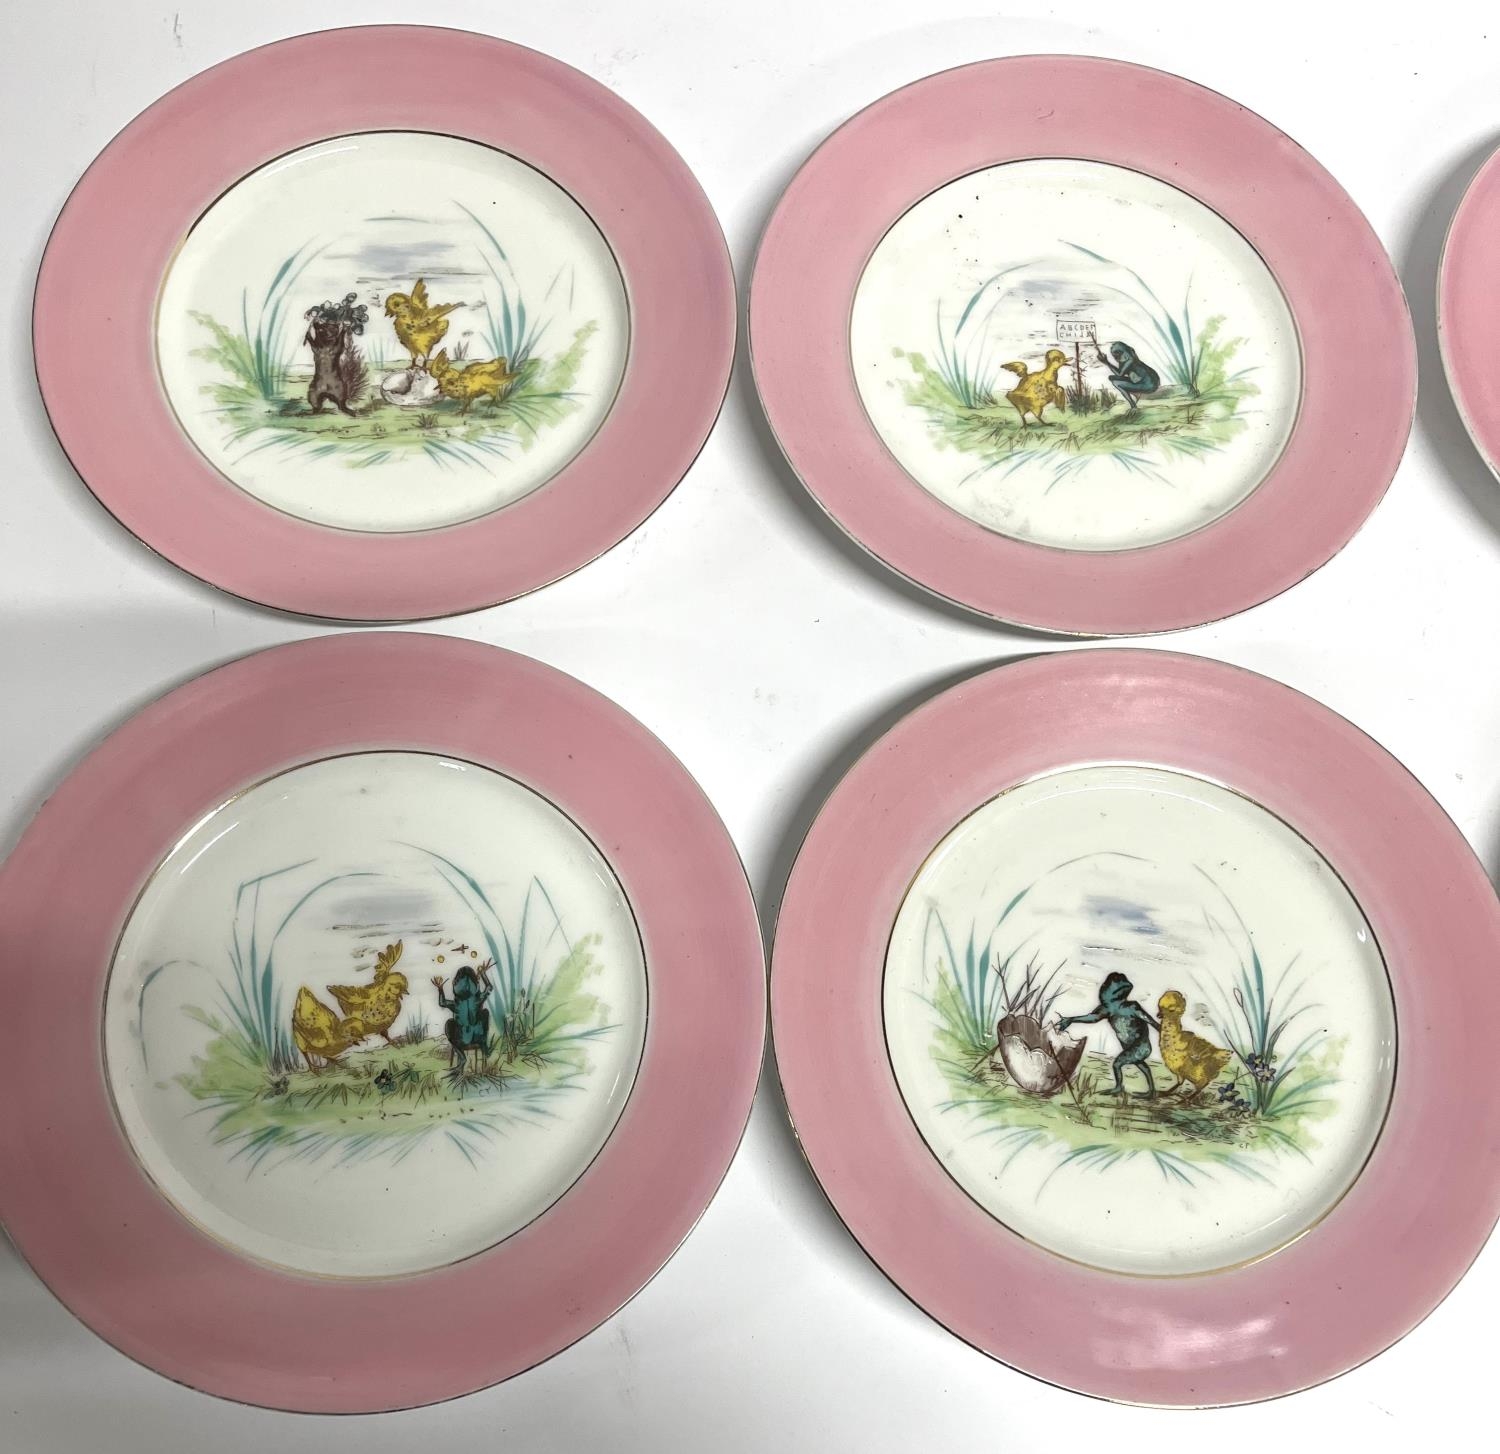 Six Victorian hand-painted plates depicting scenes featuring a newly hatched Chick and a Frog (6) - Image 2 of 3